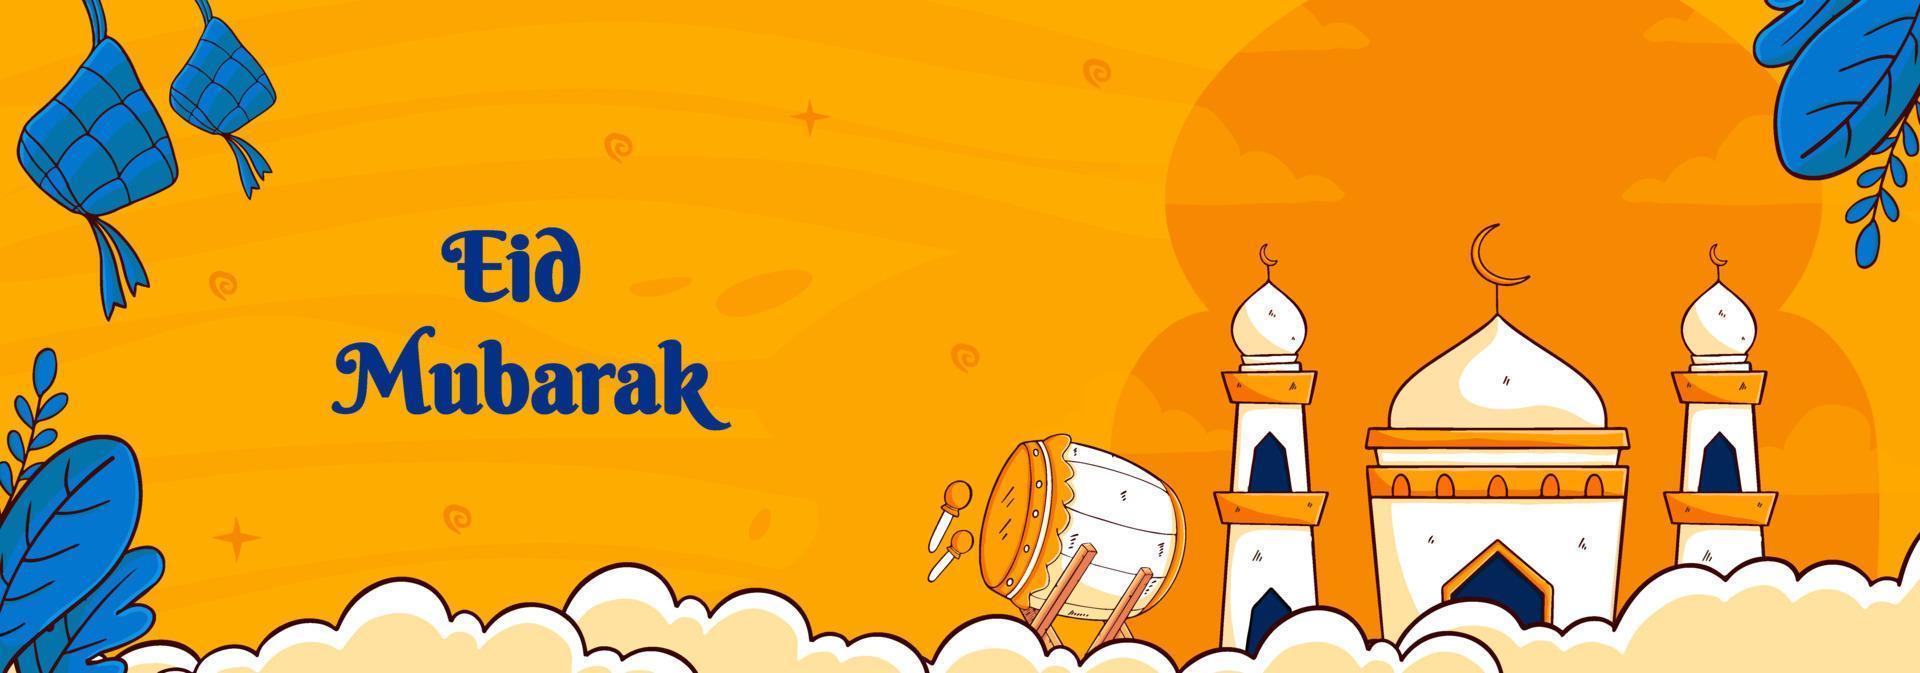 Eid  Mubarak Banner Template  With Ketupat and Mosque Concept. Hand Drawn And Flat Style vector